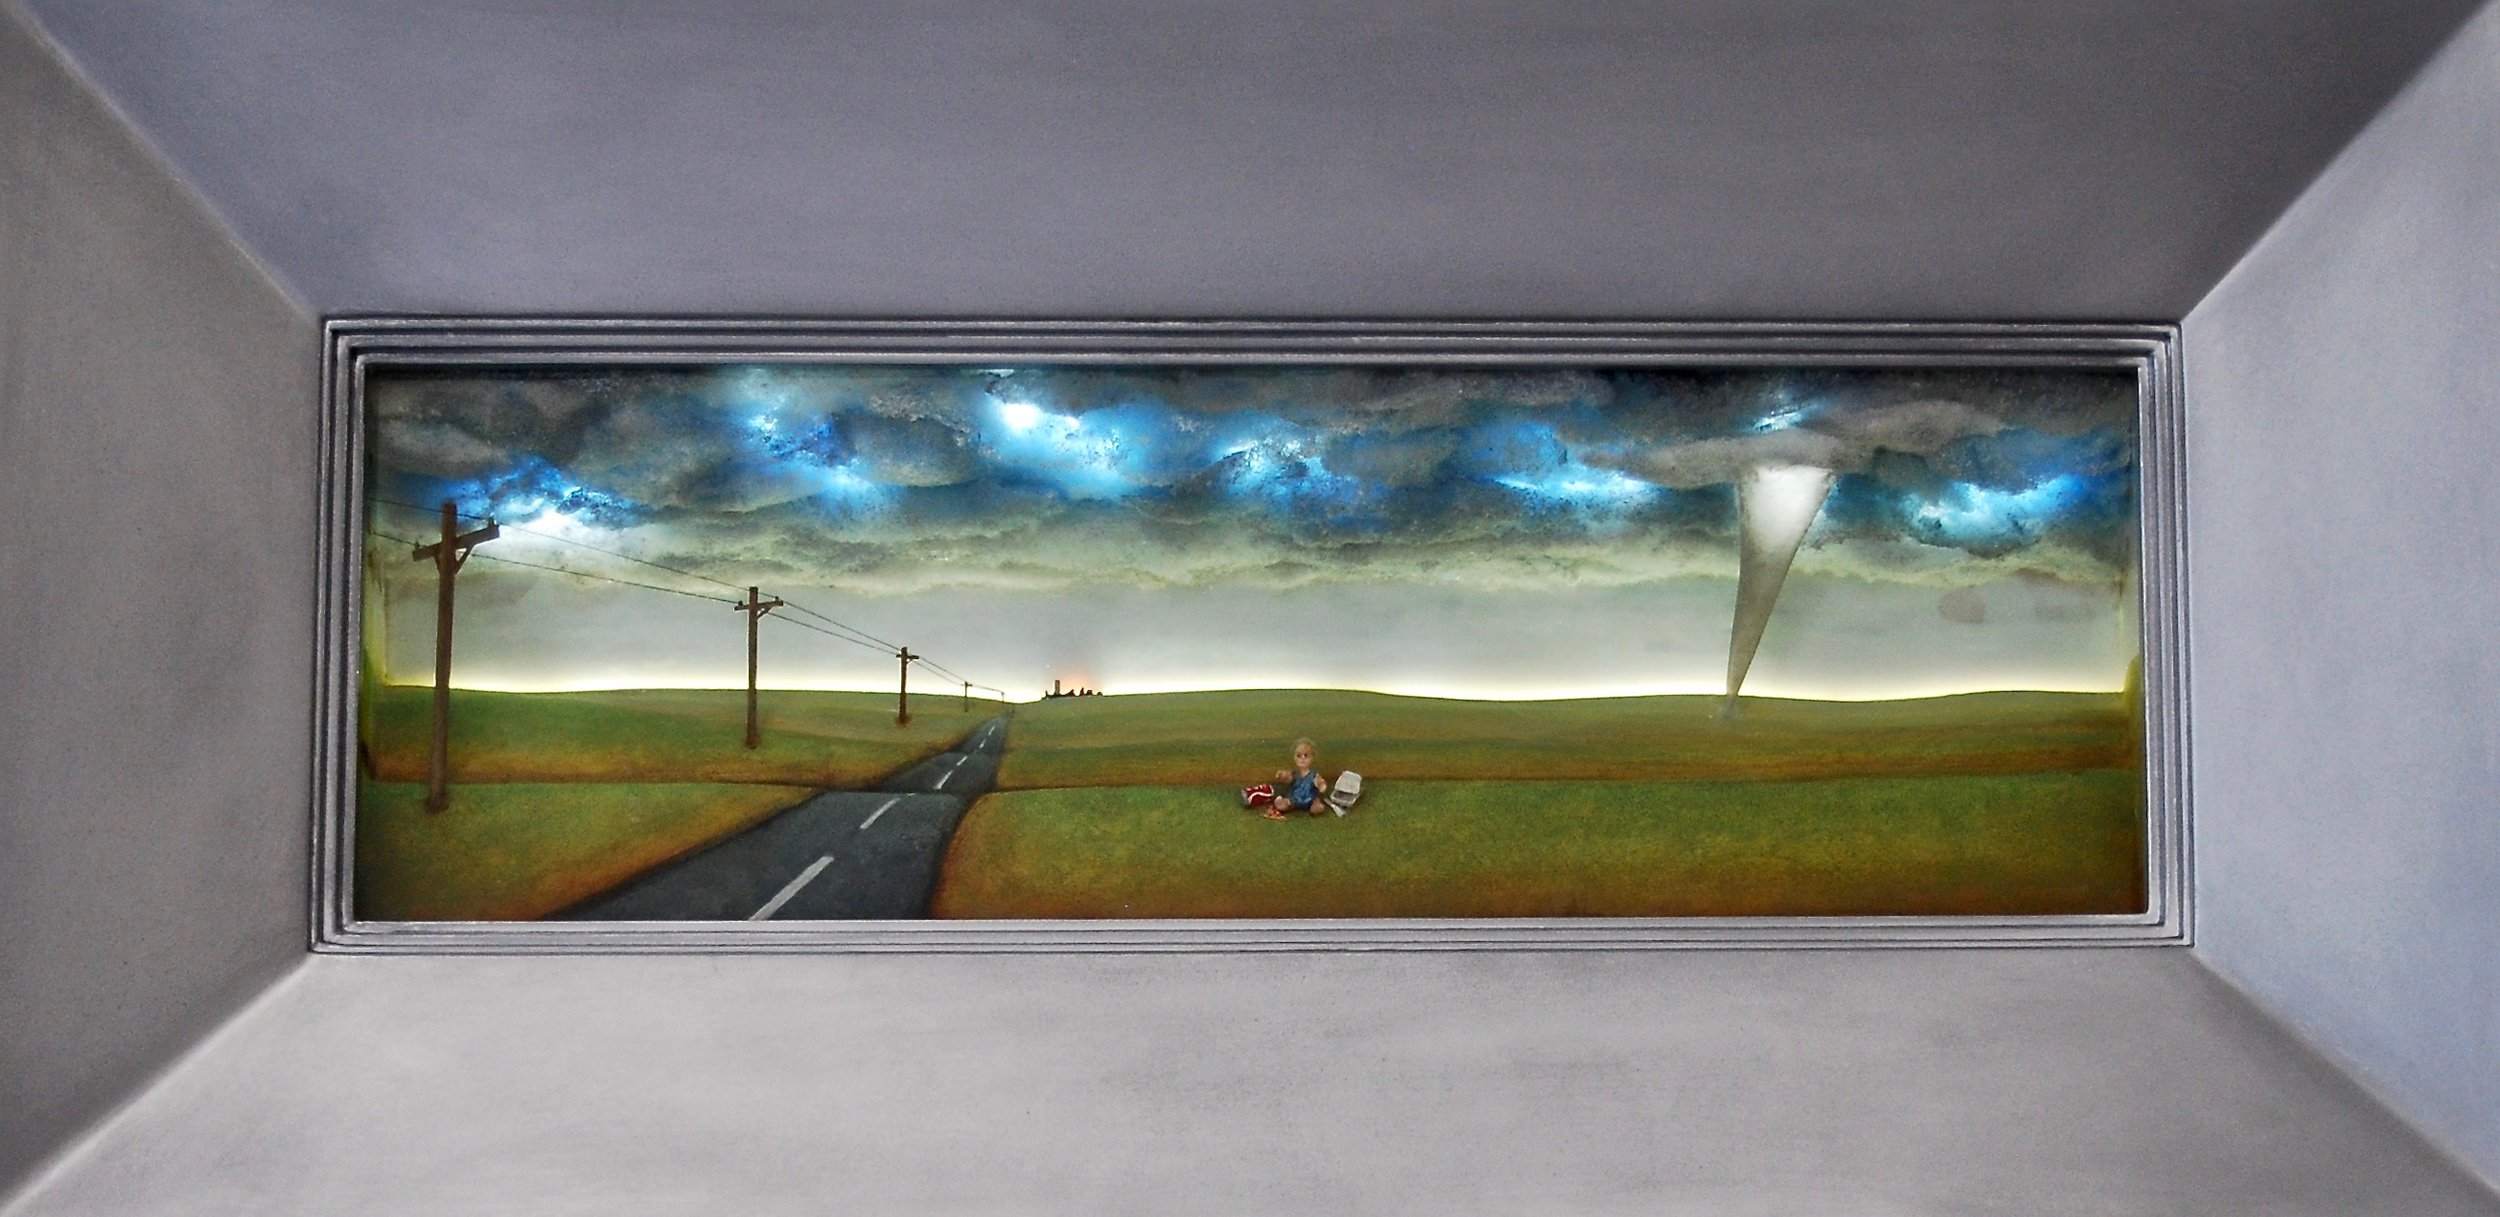   Thomas Coffin - Last Trip to the Dairy Queen, 16"h x 32"w x 5 3/4"d, mixed media 3-d diorama encased in acrylic resin, wood frame  